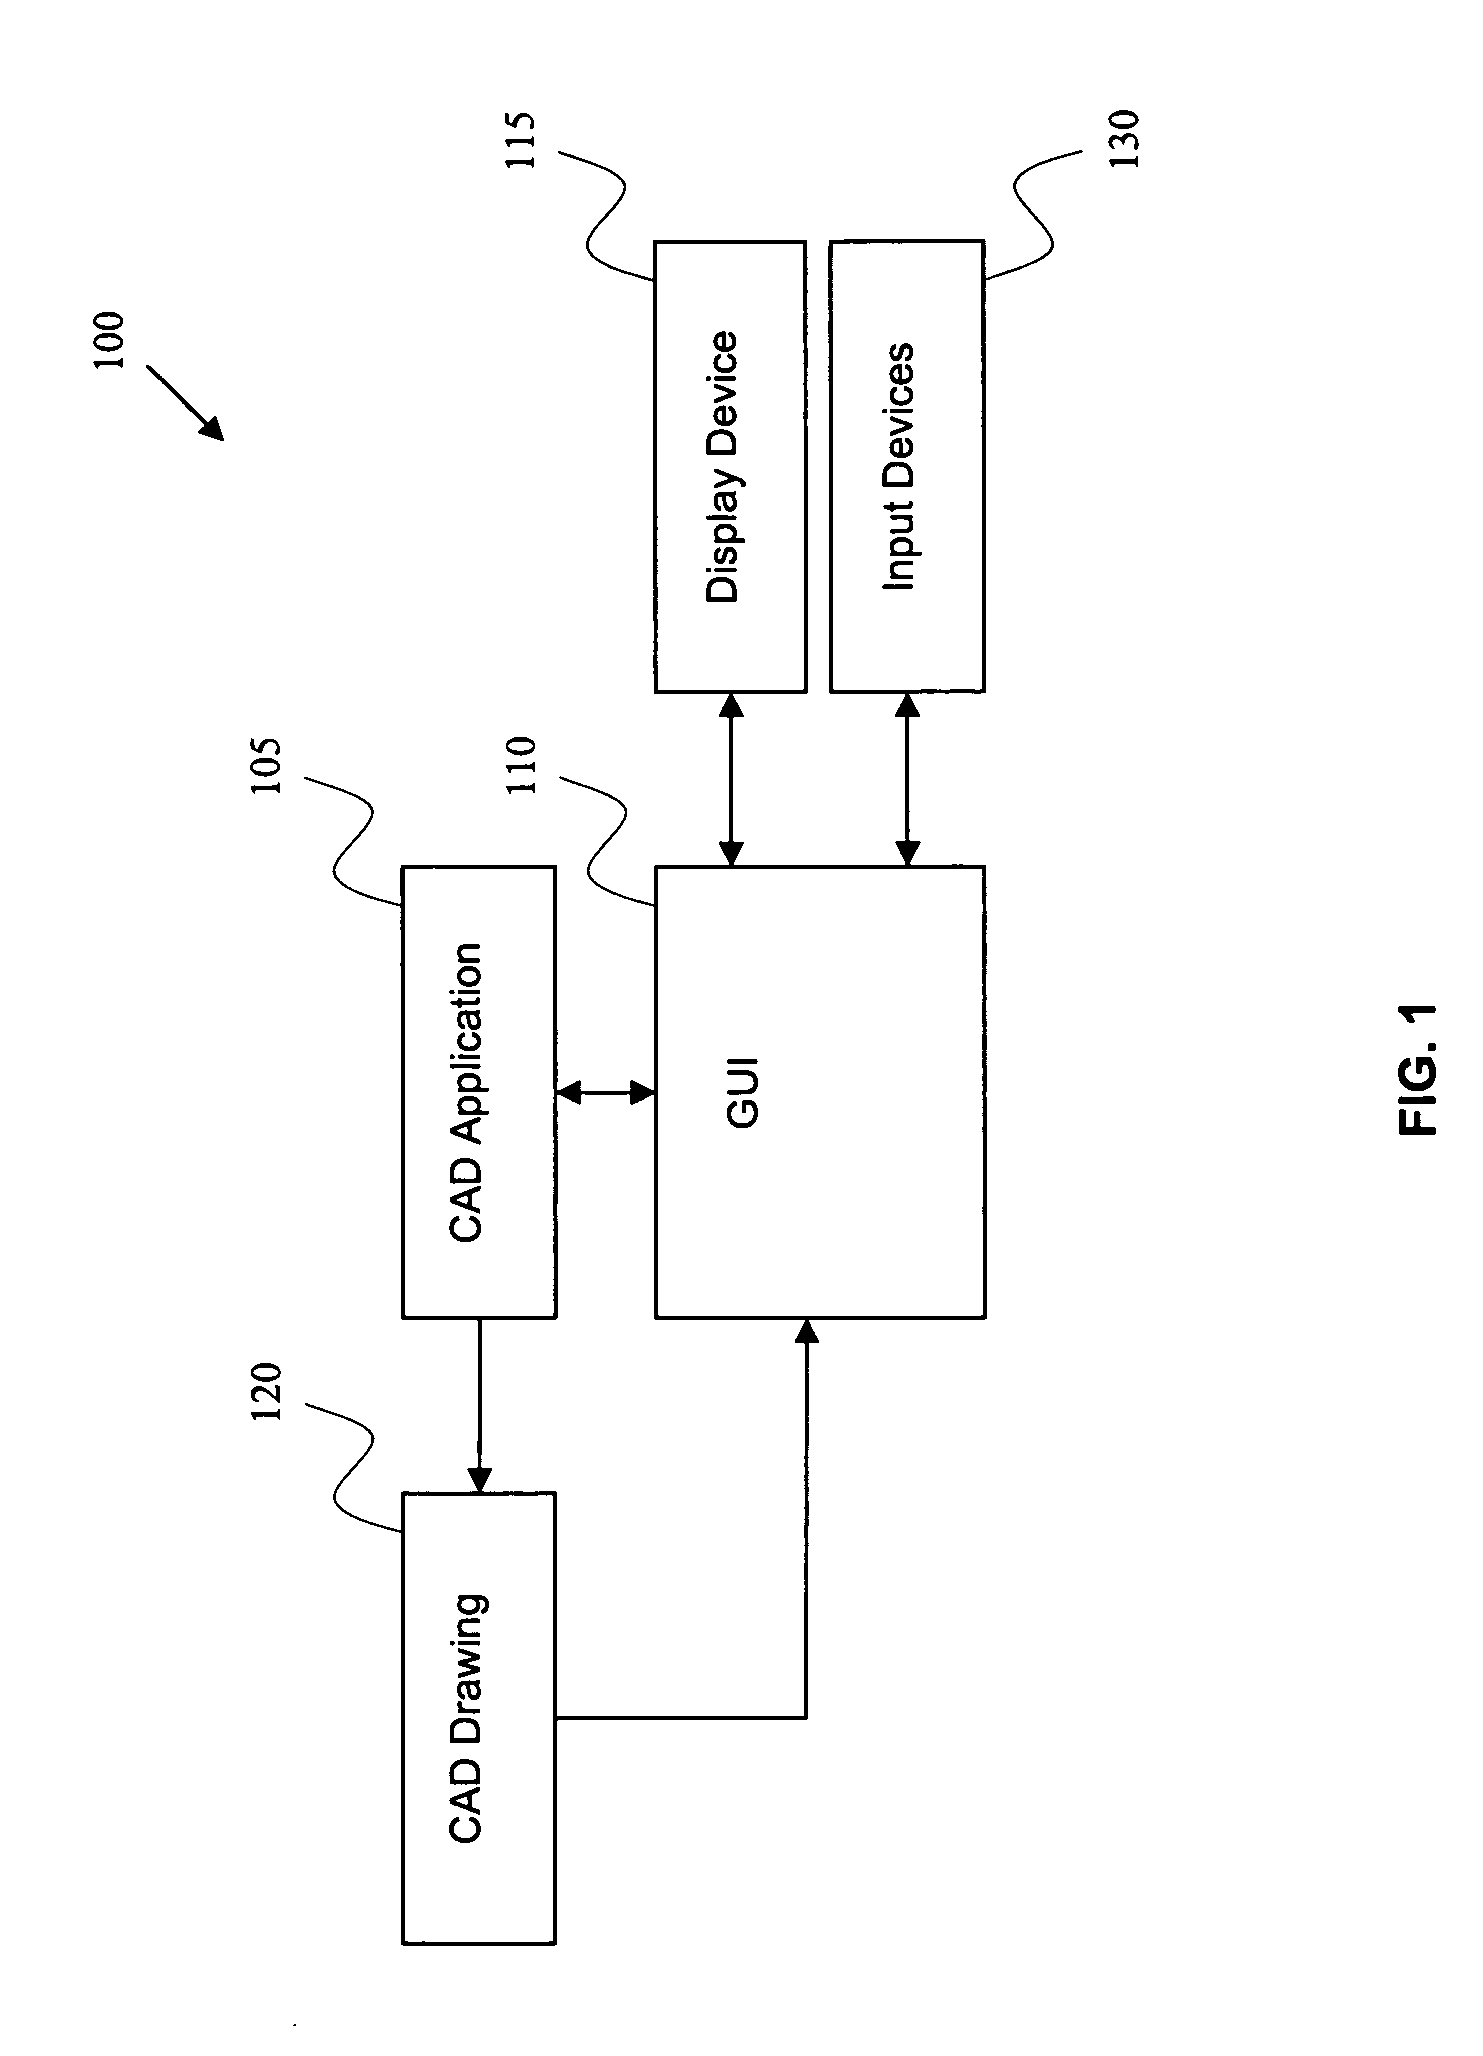 Method for generating regular elements in a computer-aided design drawing